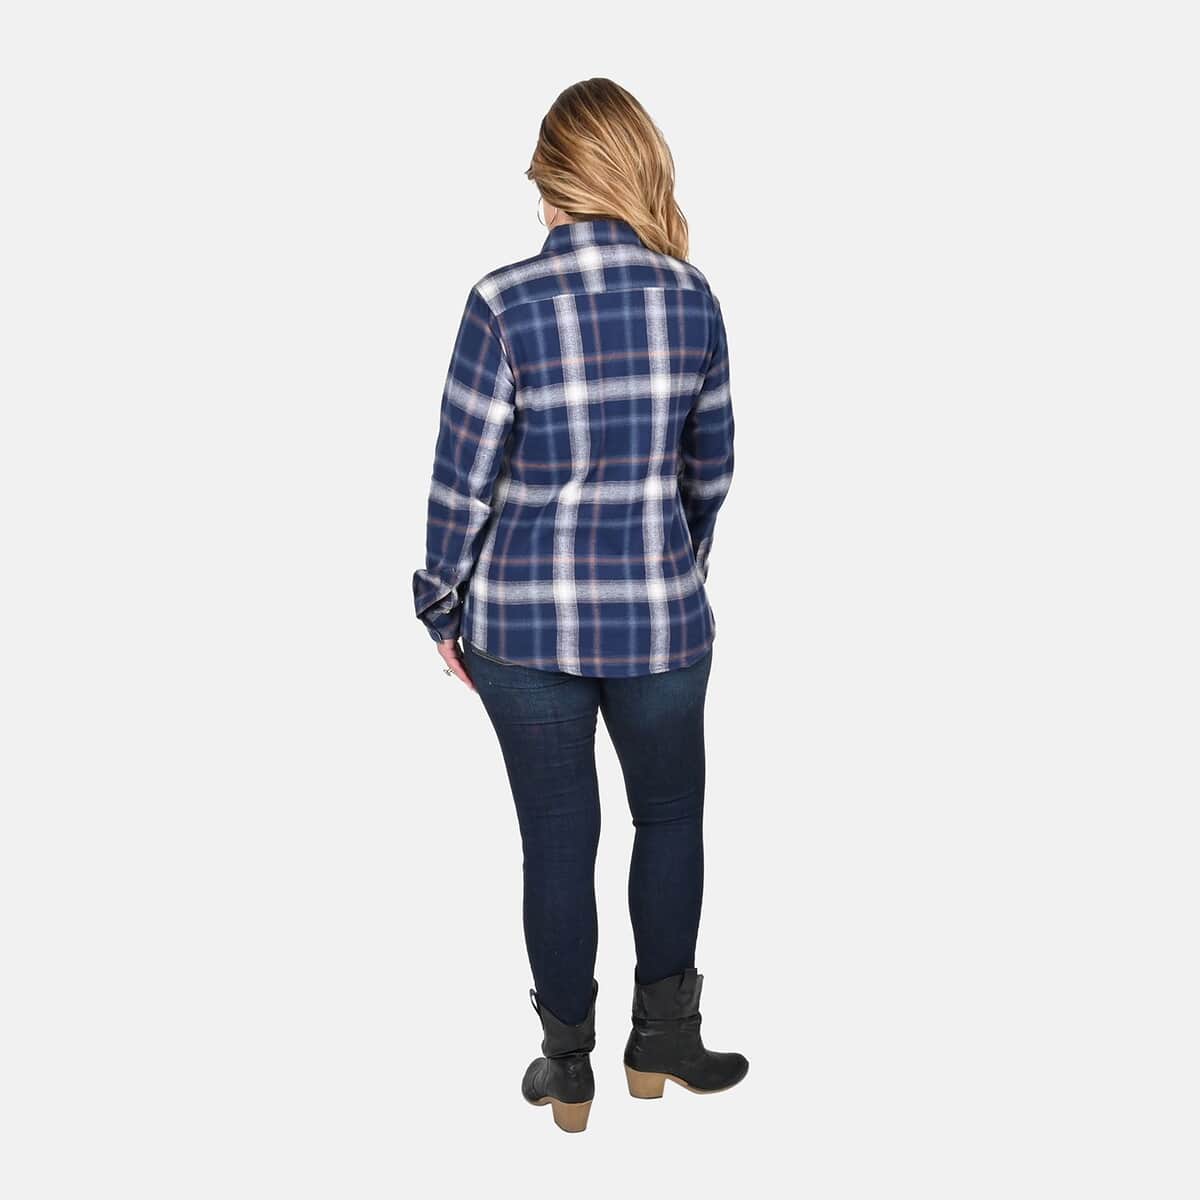 Victory Sportswear Blue and White Plaid Pattern Cotton Flannel Shirt - XL image number 1